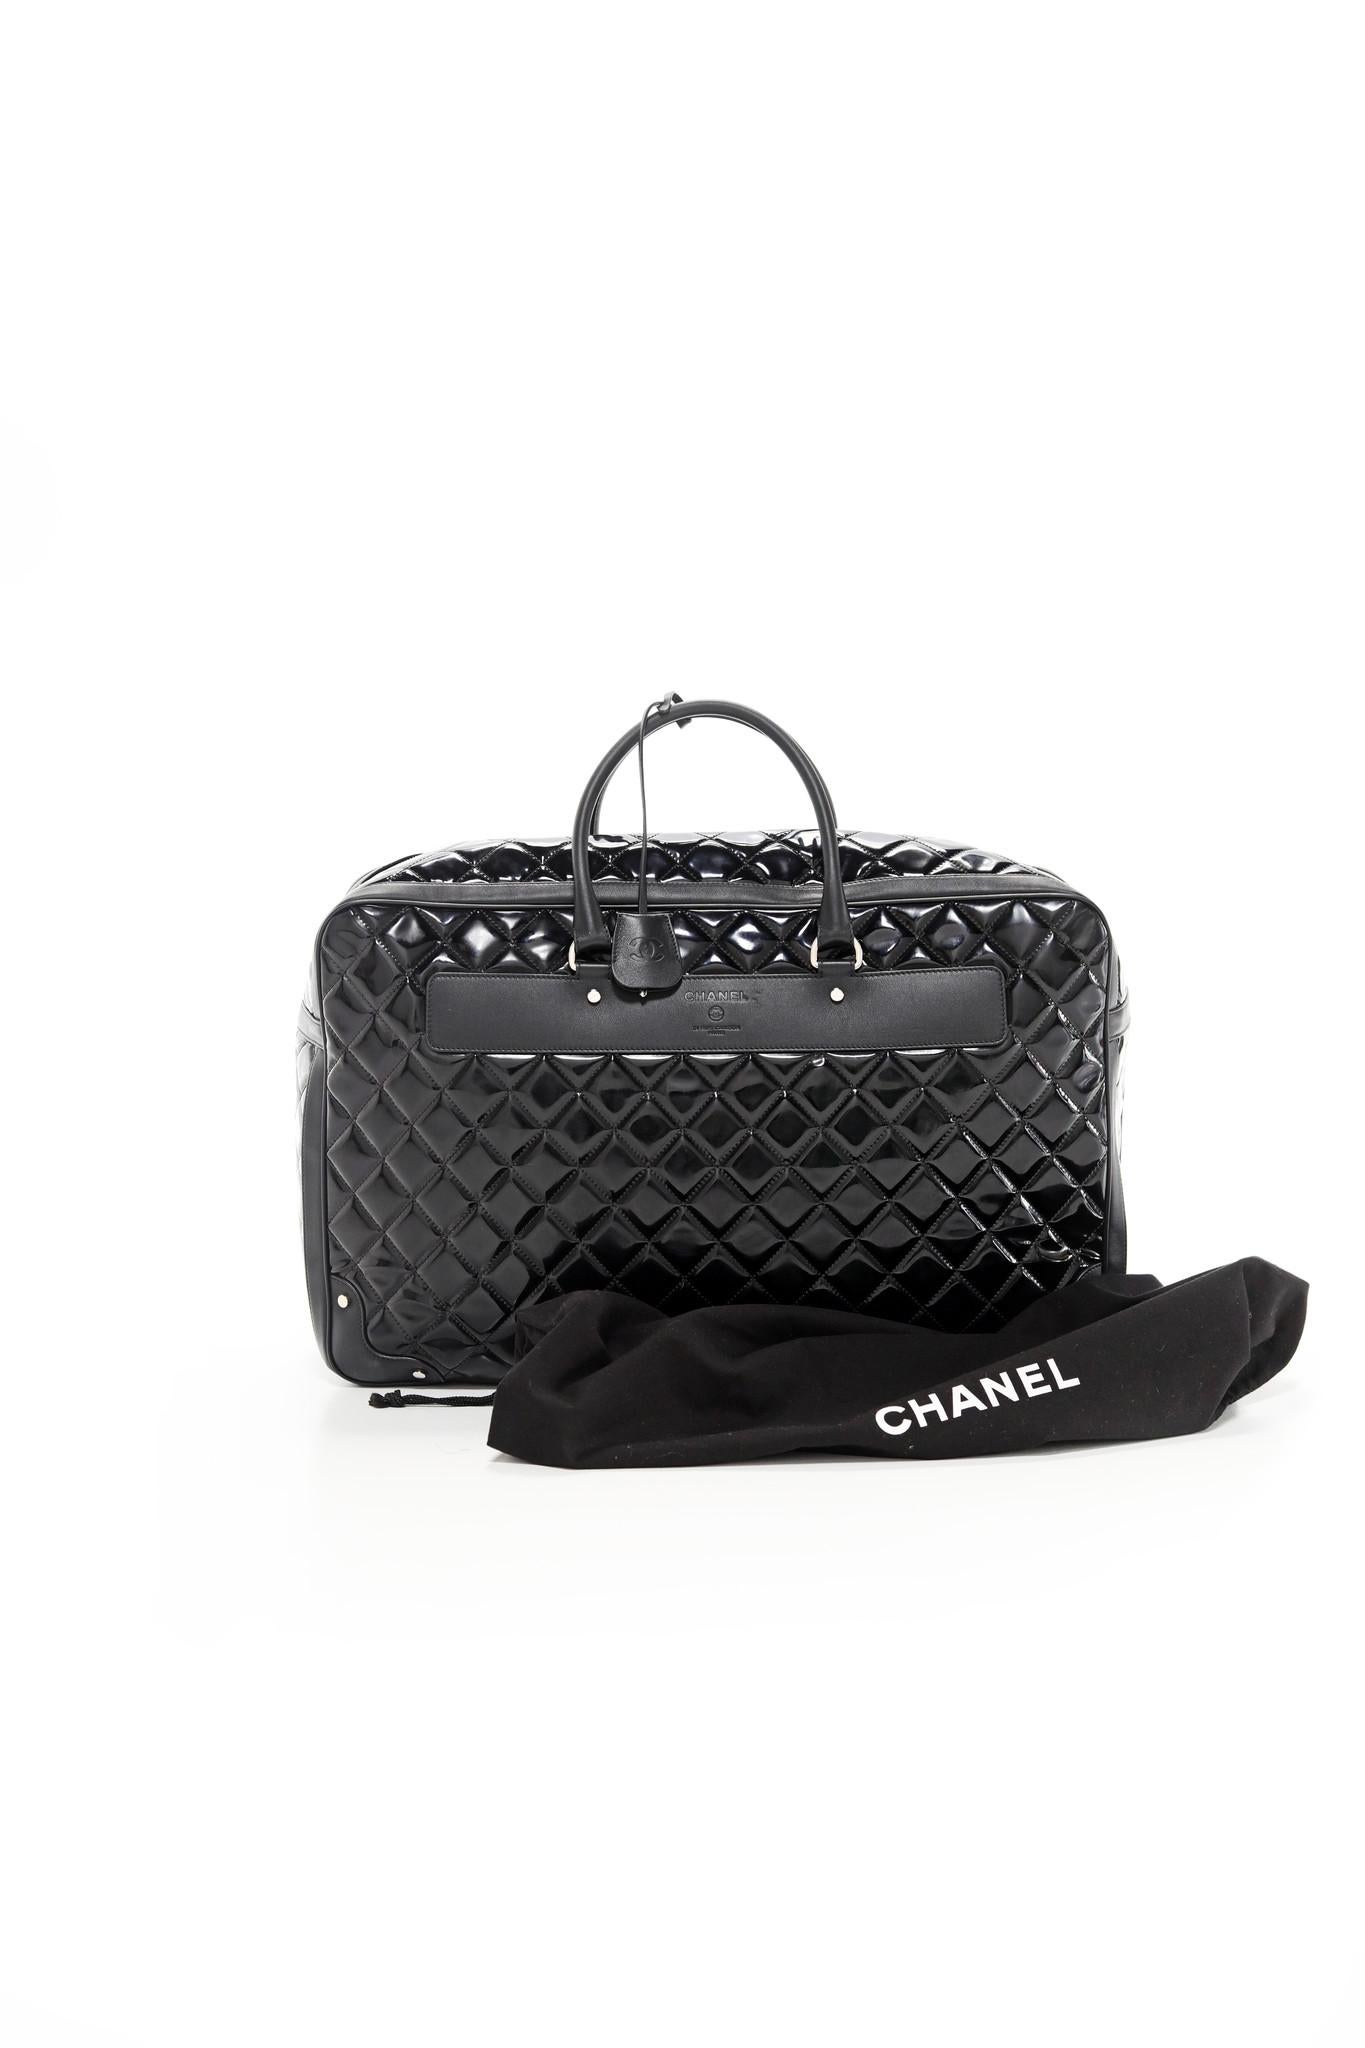 Chanel 2015 Timeless Quilted Carry-on Travel Tote Royal Black Patent Leather Bag For Sale 9